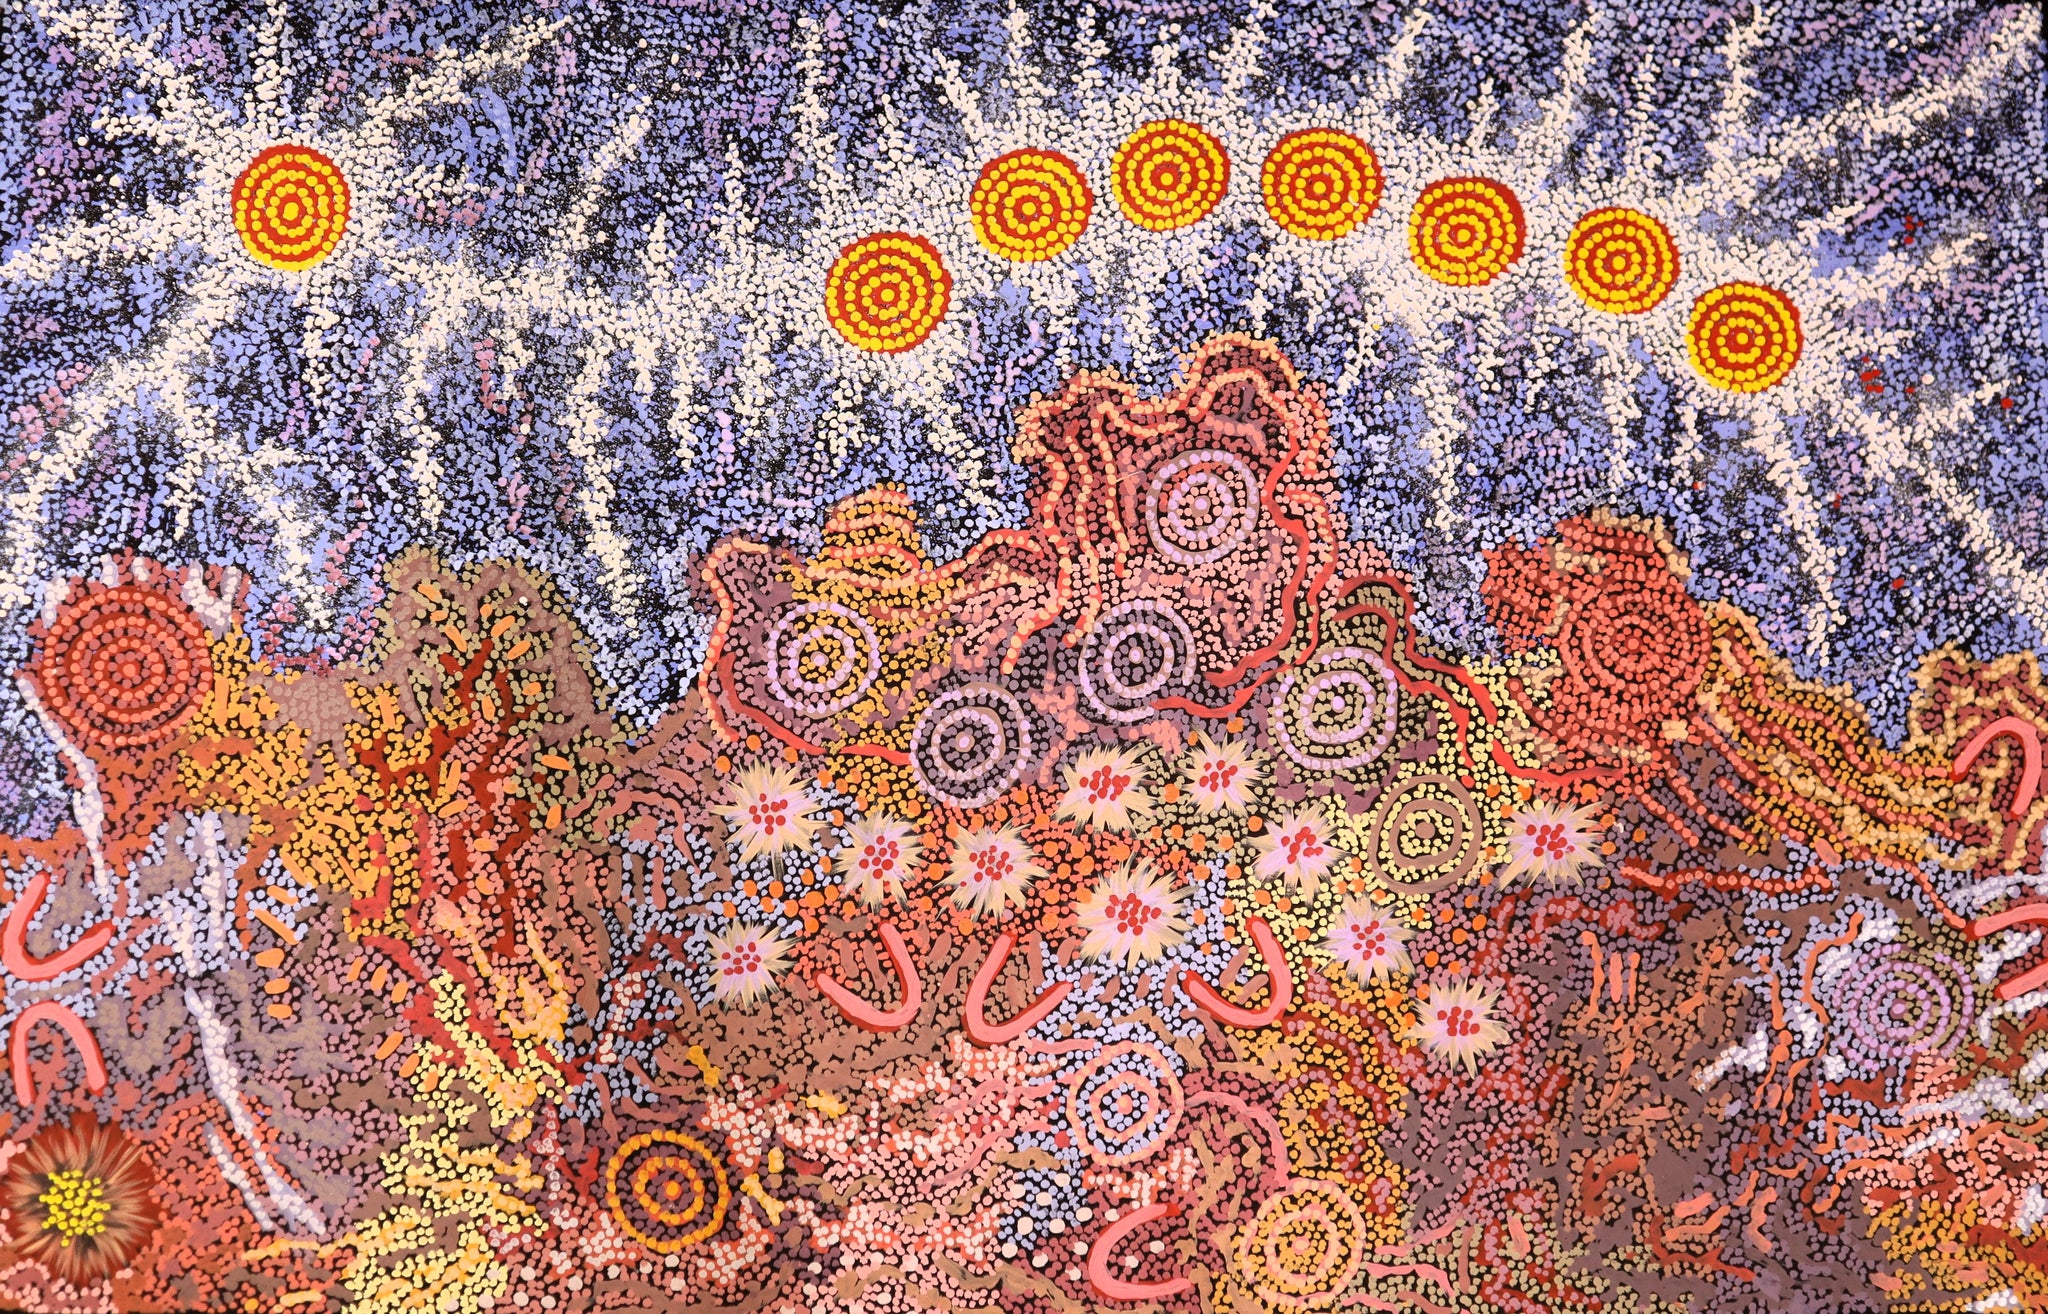 GABRIELLA POSSUM NUNGURRAYI / GRANDMOTHER’S COUNTRY AND SEVEN SISTERS DREAMING